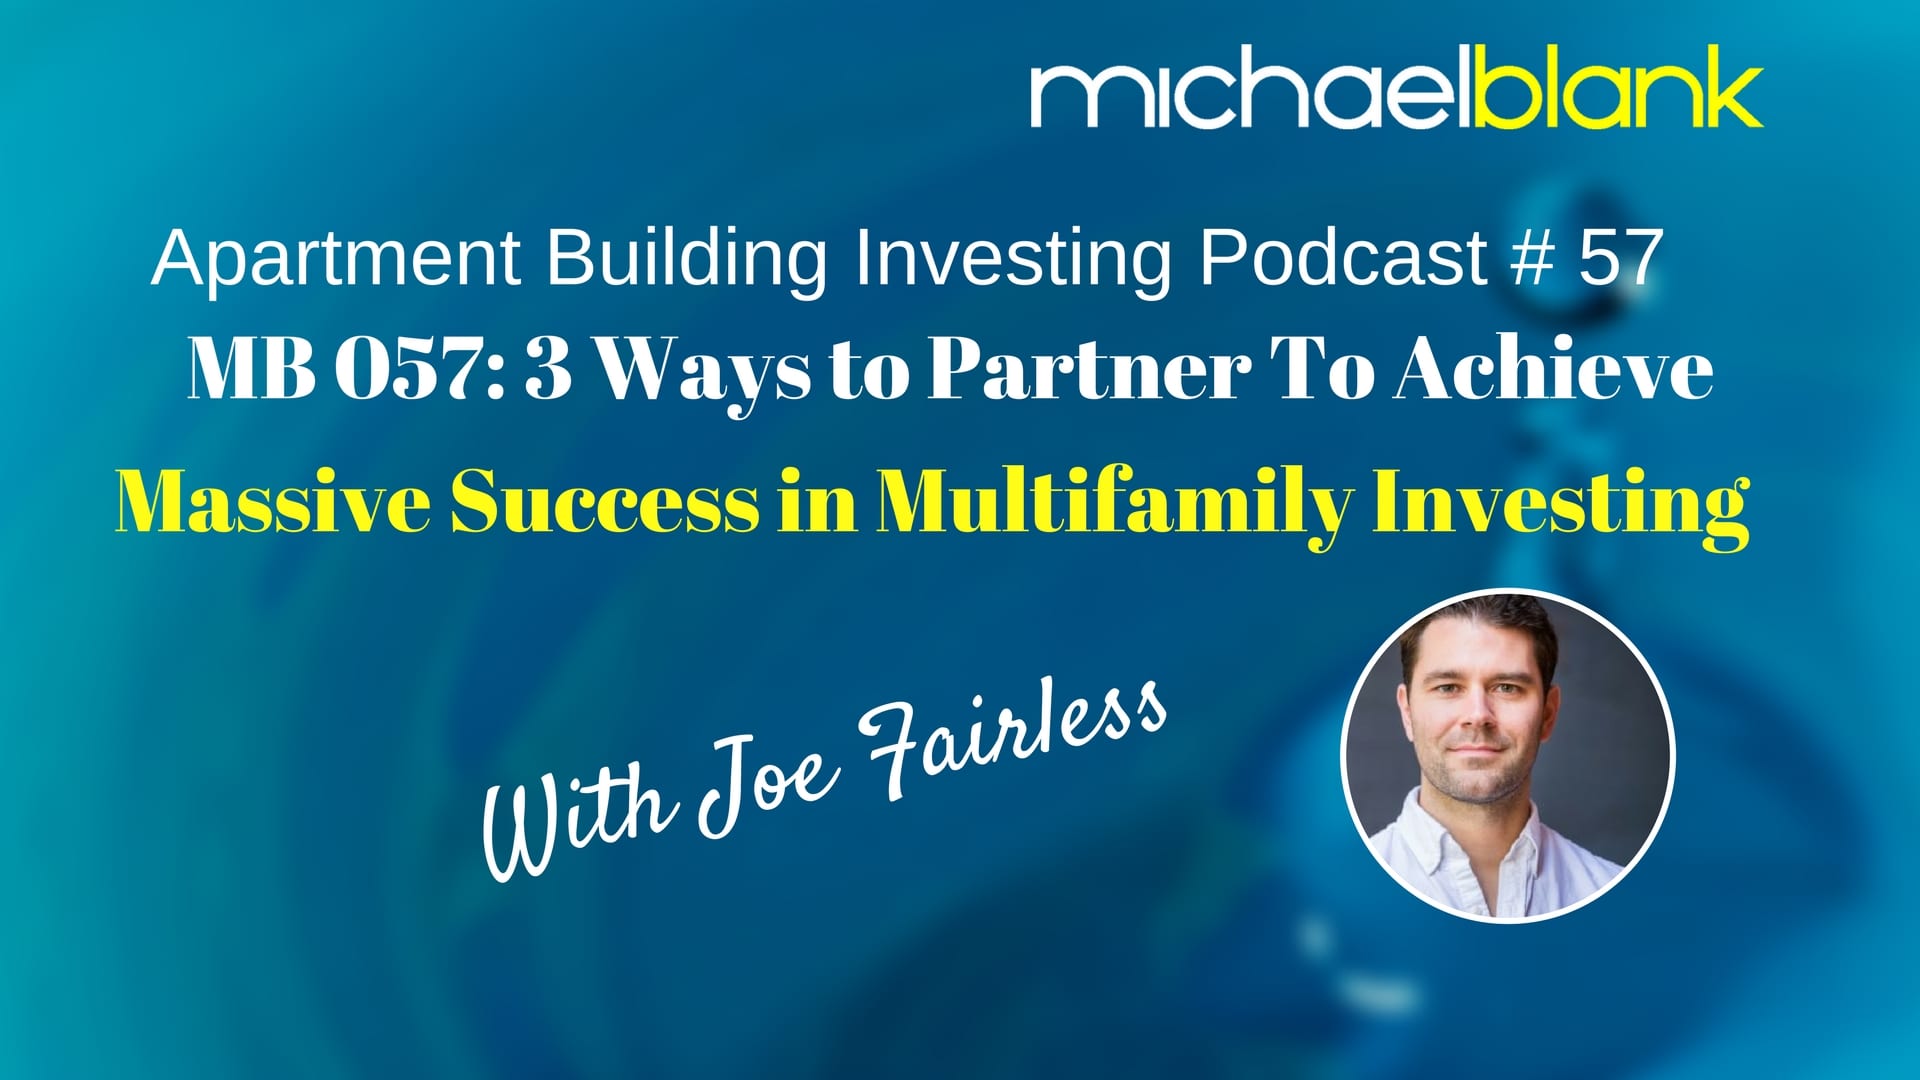 MB 057: 3 Ways to Partner To Achieve Massive Success in Multifamily Investing – With Joe Fairless